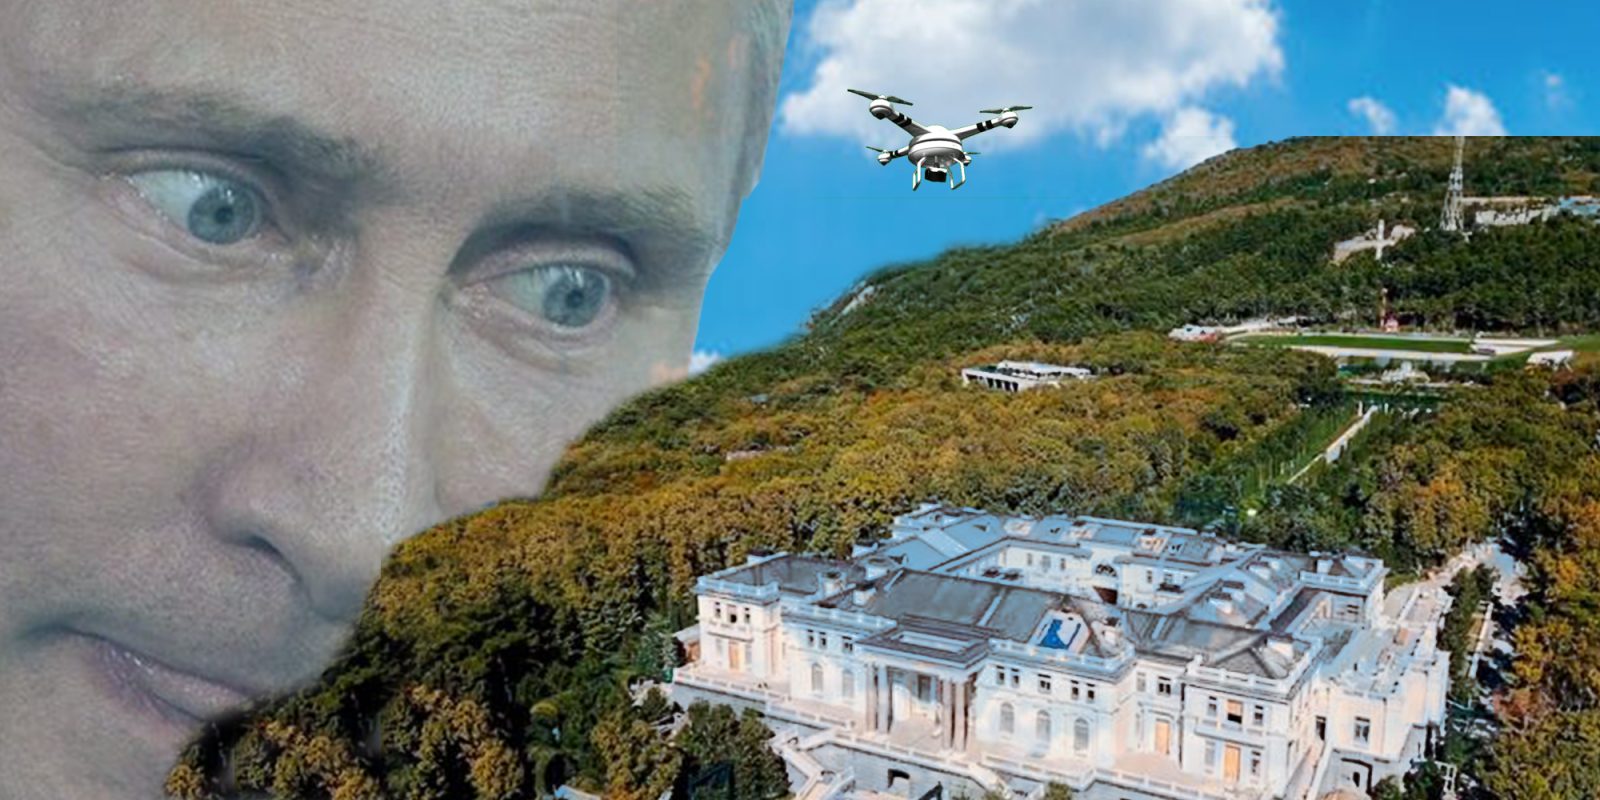 Is This Drone Video Of Putin S Secret Palace Dronedj